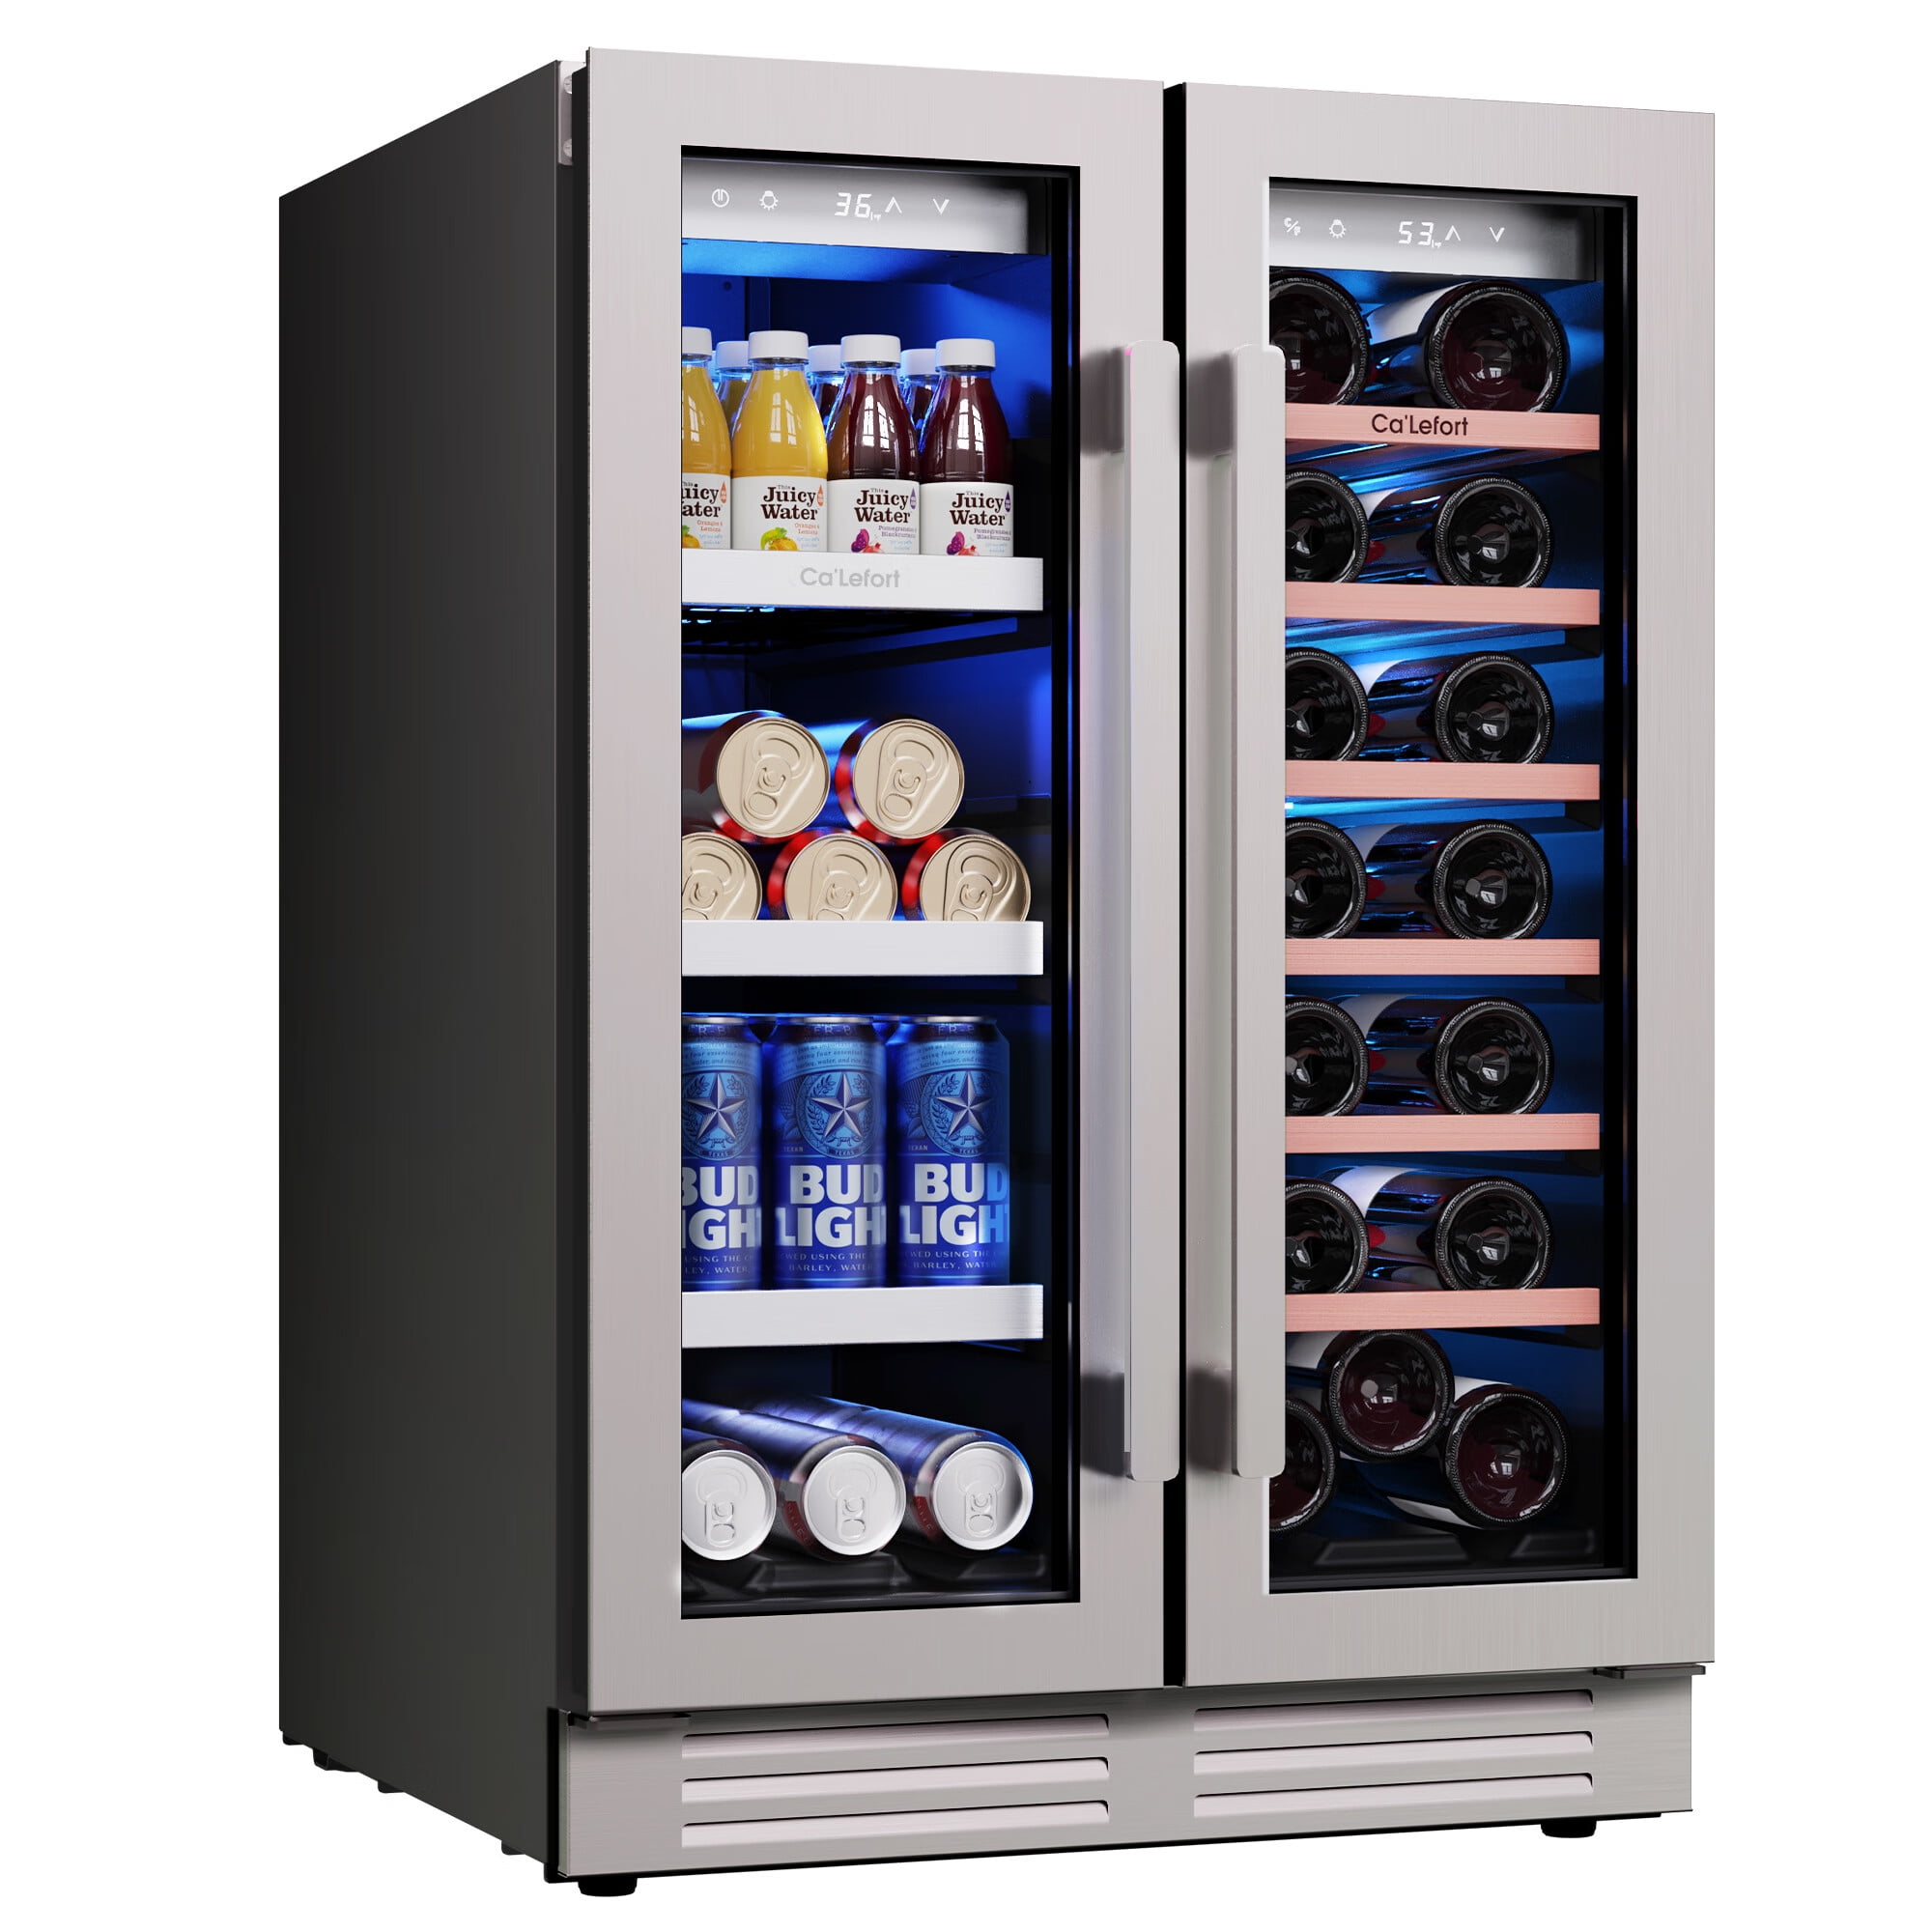 Ca'Lefort 24 Inch Wine and Beverage Refrigerator, Digital Temperature Control Dual Zone Wine Fridge Cooler with Stainless Steel French Door